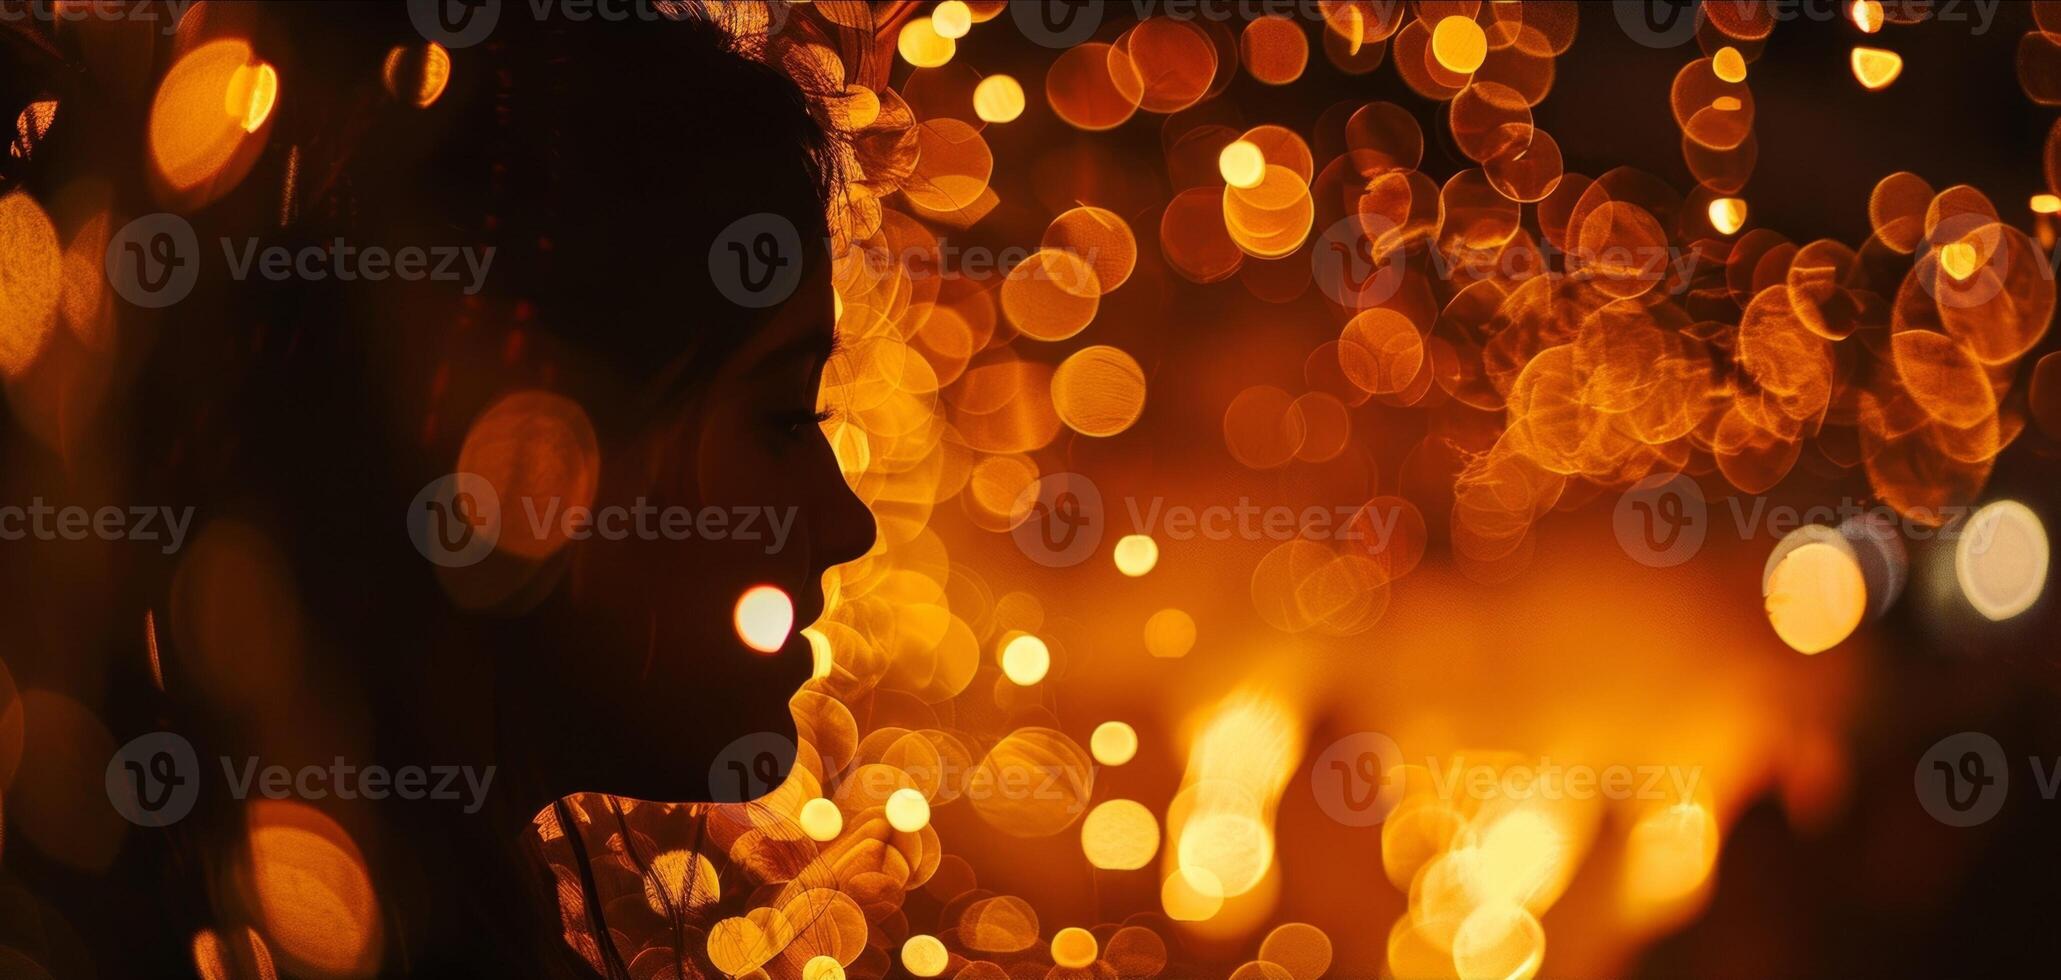 The storytellers faces are illuminated by the warm glow of the fire creating a mesmerizing effect. 2d flat cartoon photo